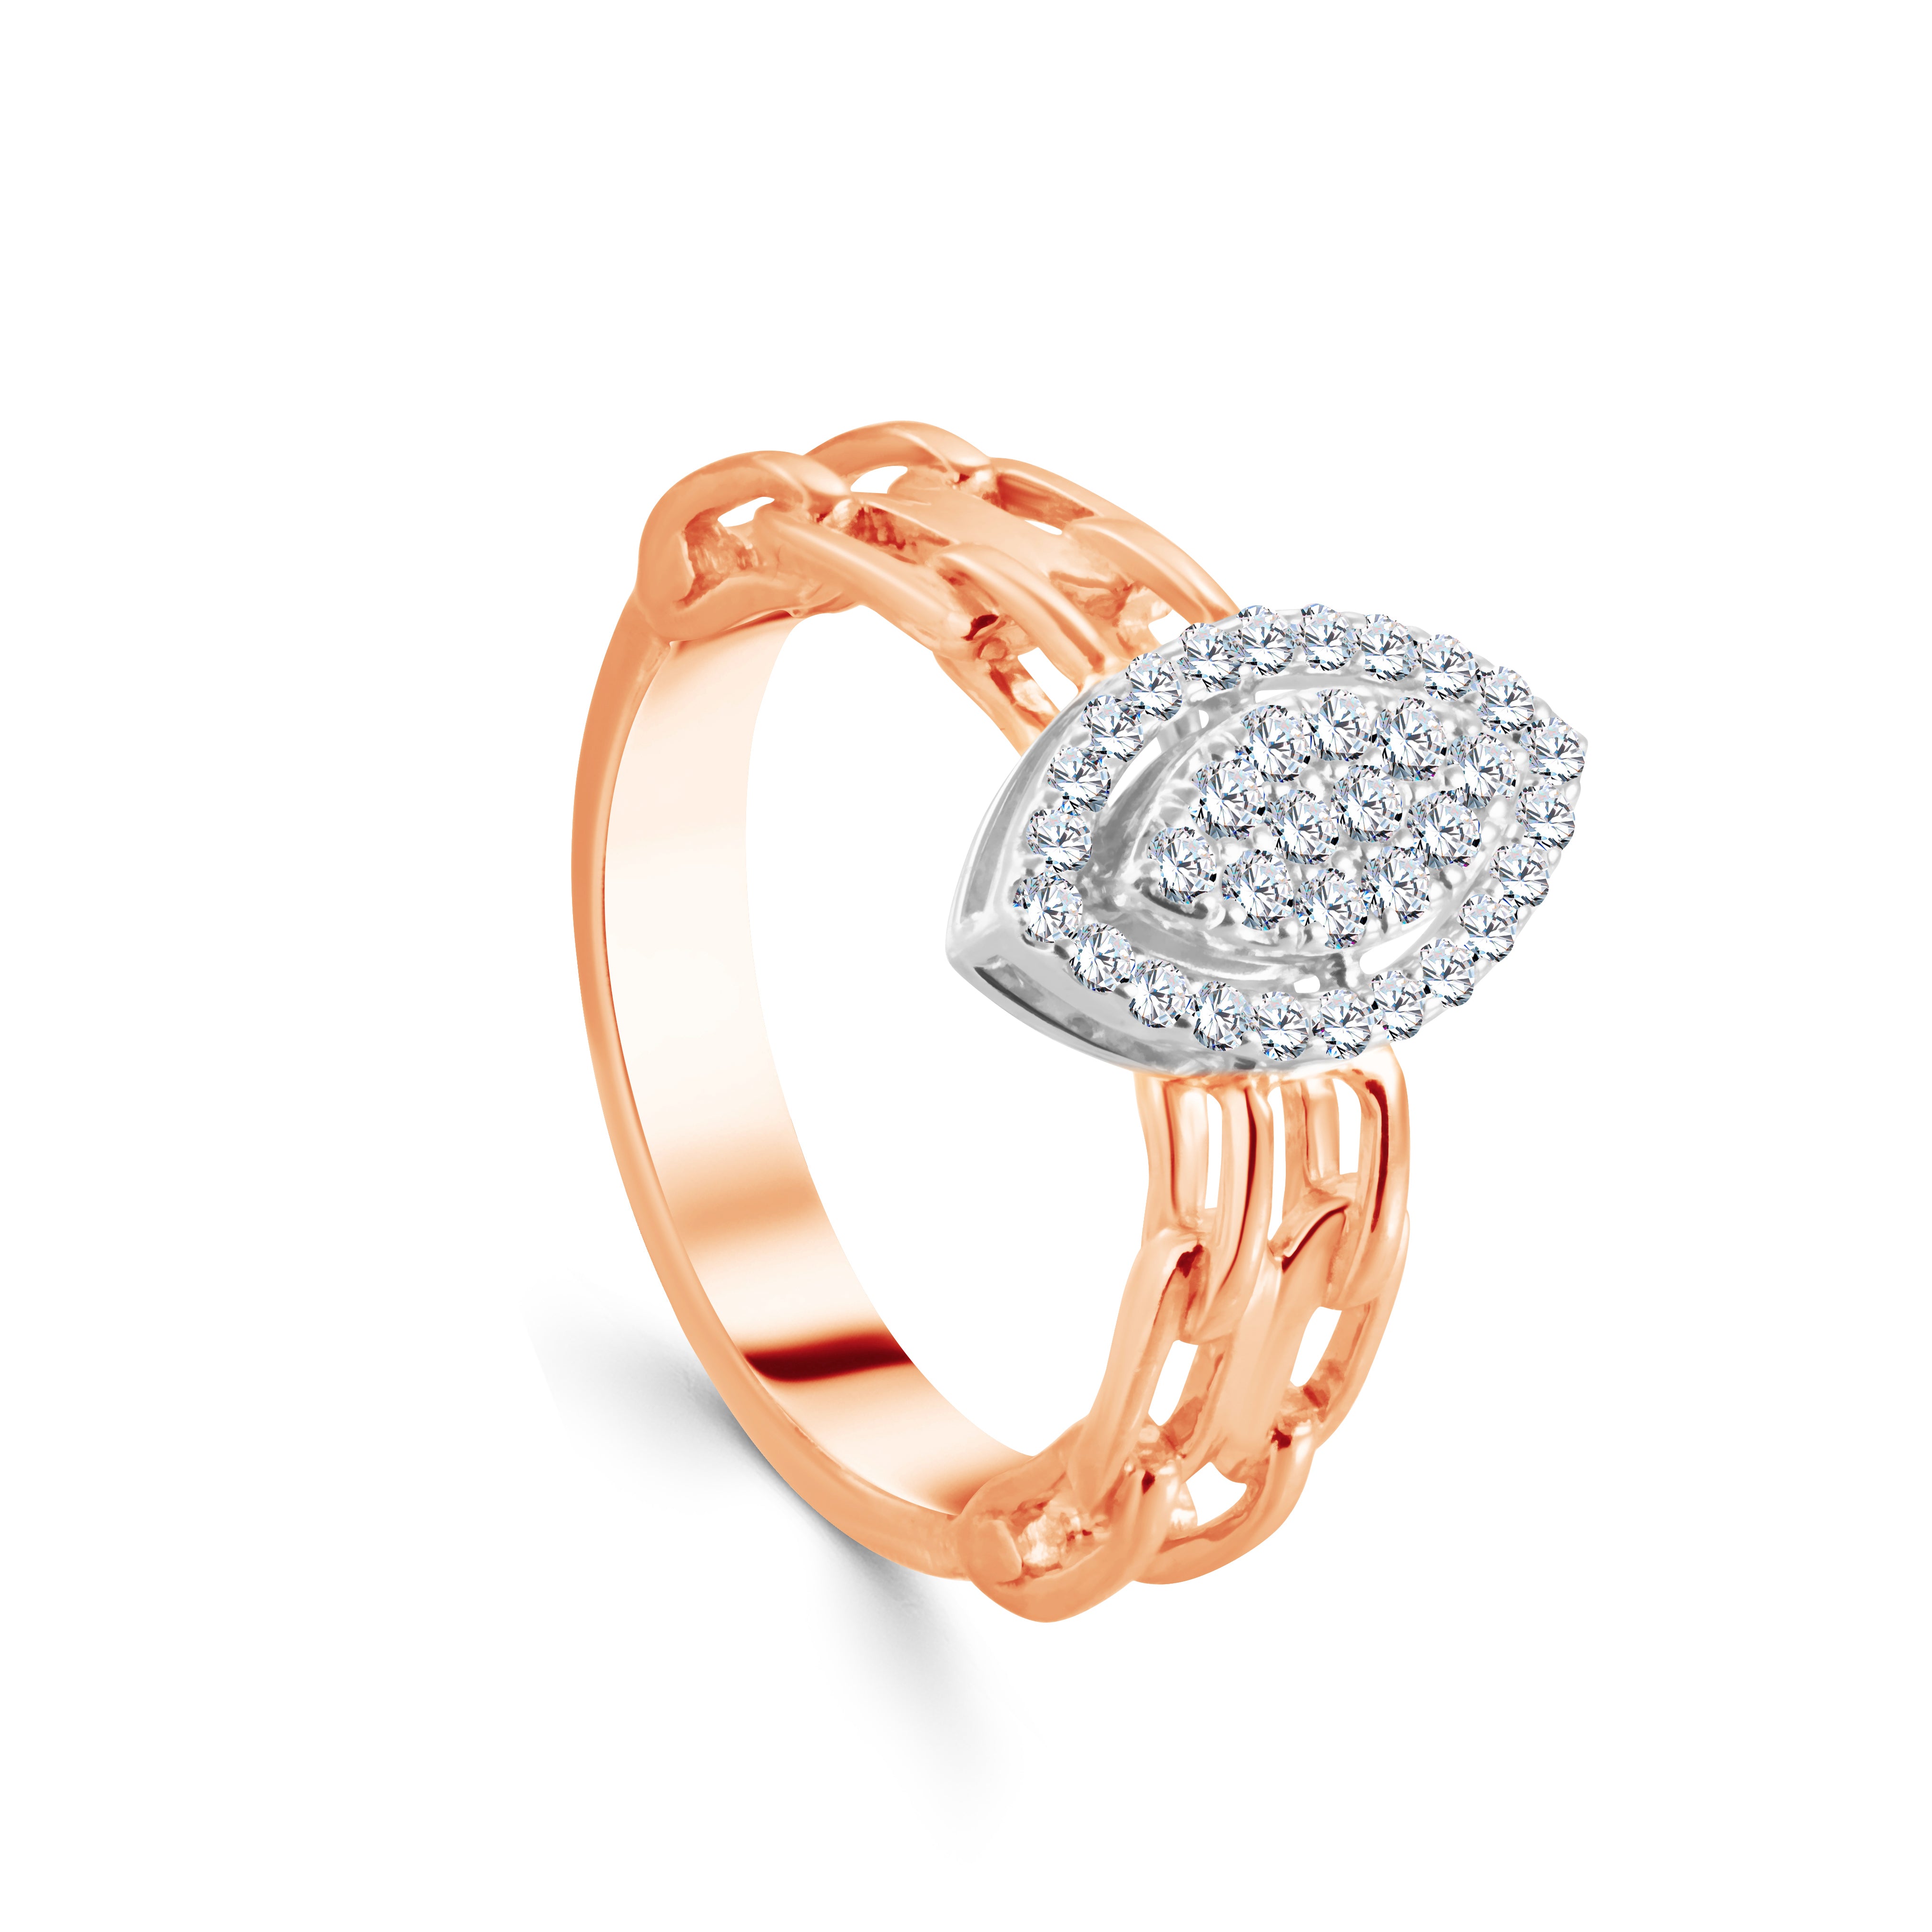 Unique Oval Shaped Ring in 18K Rose Gold - S-X09R